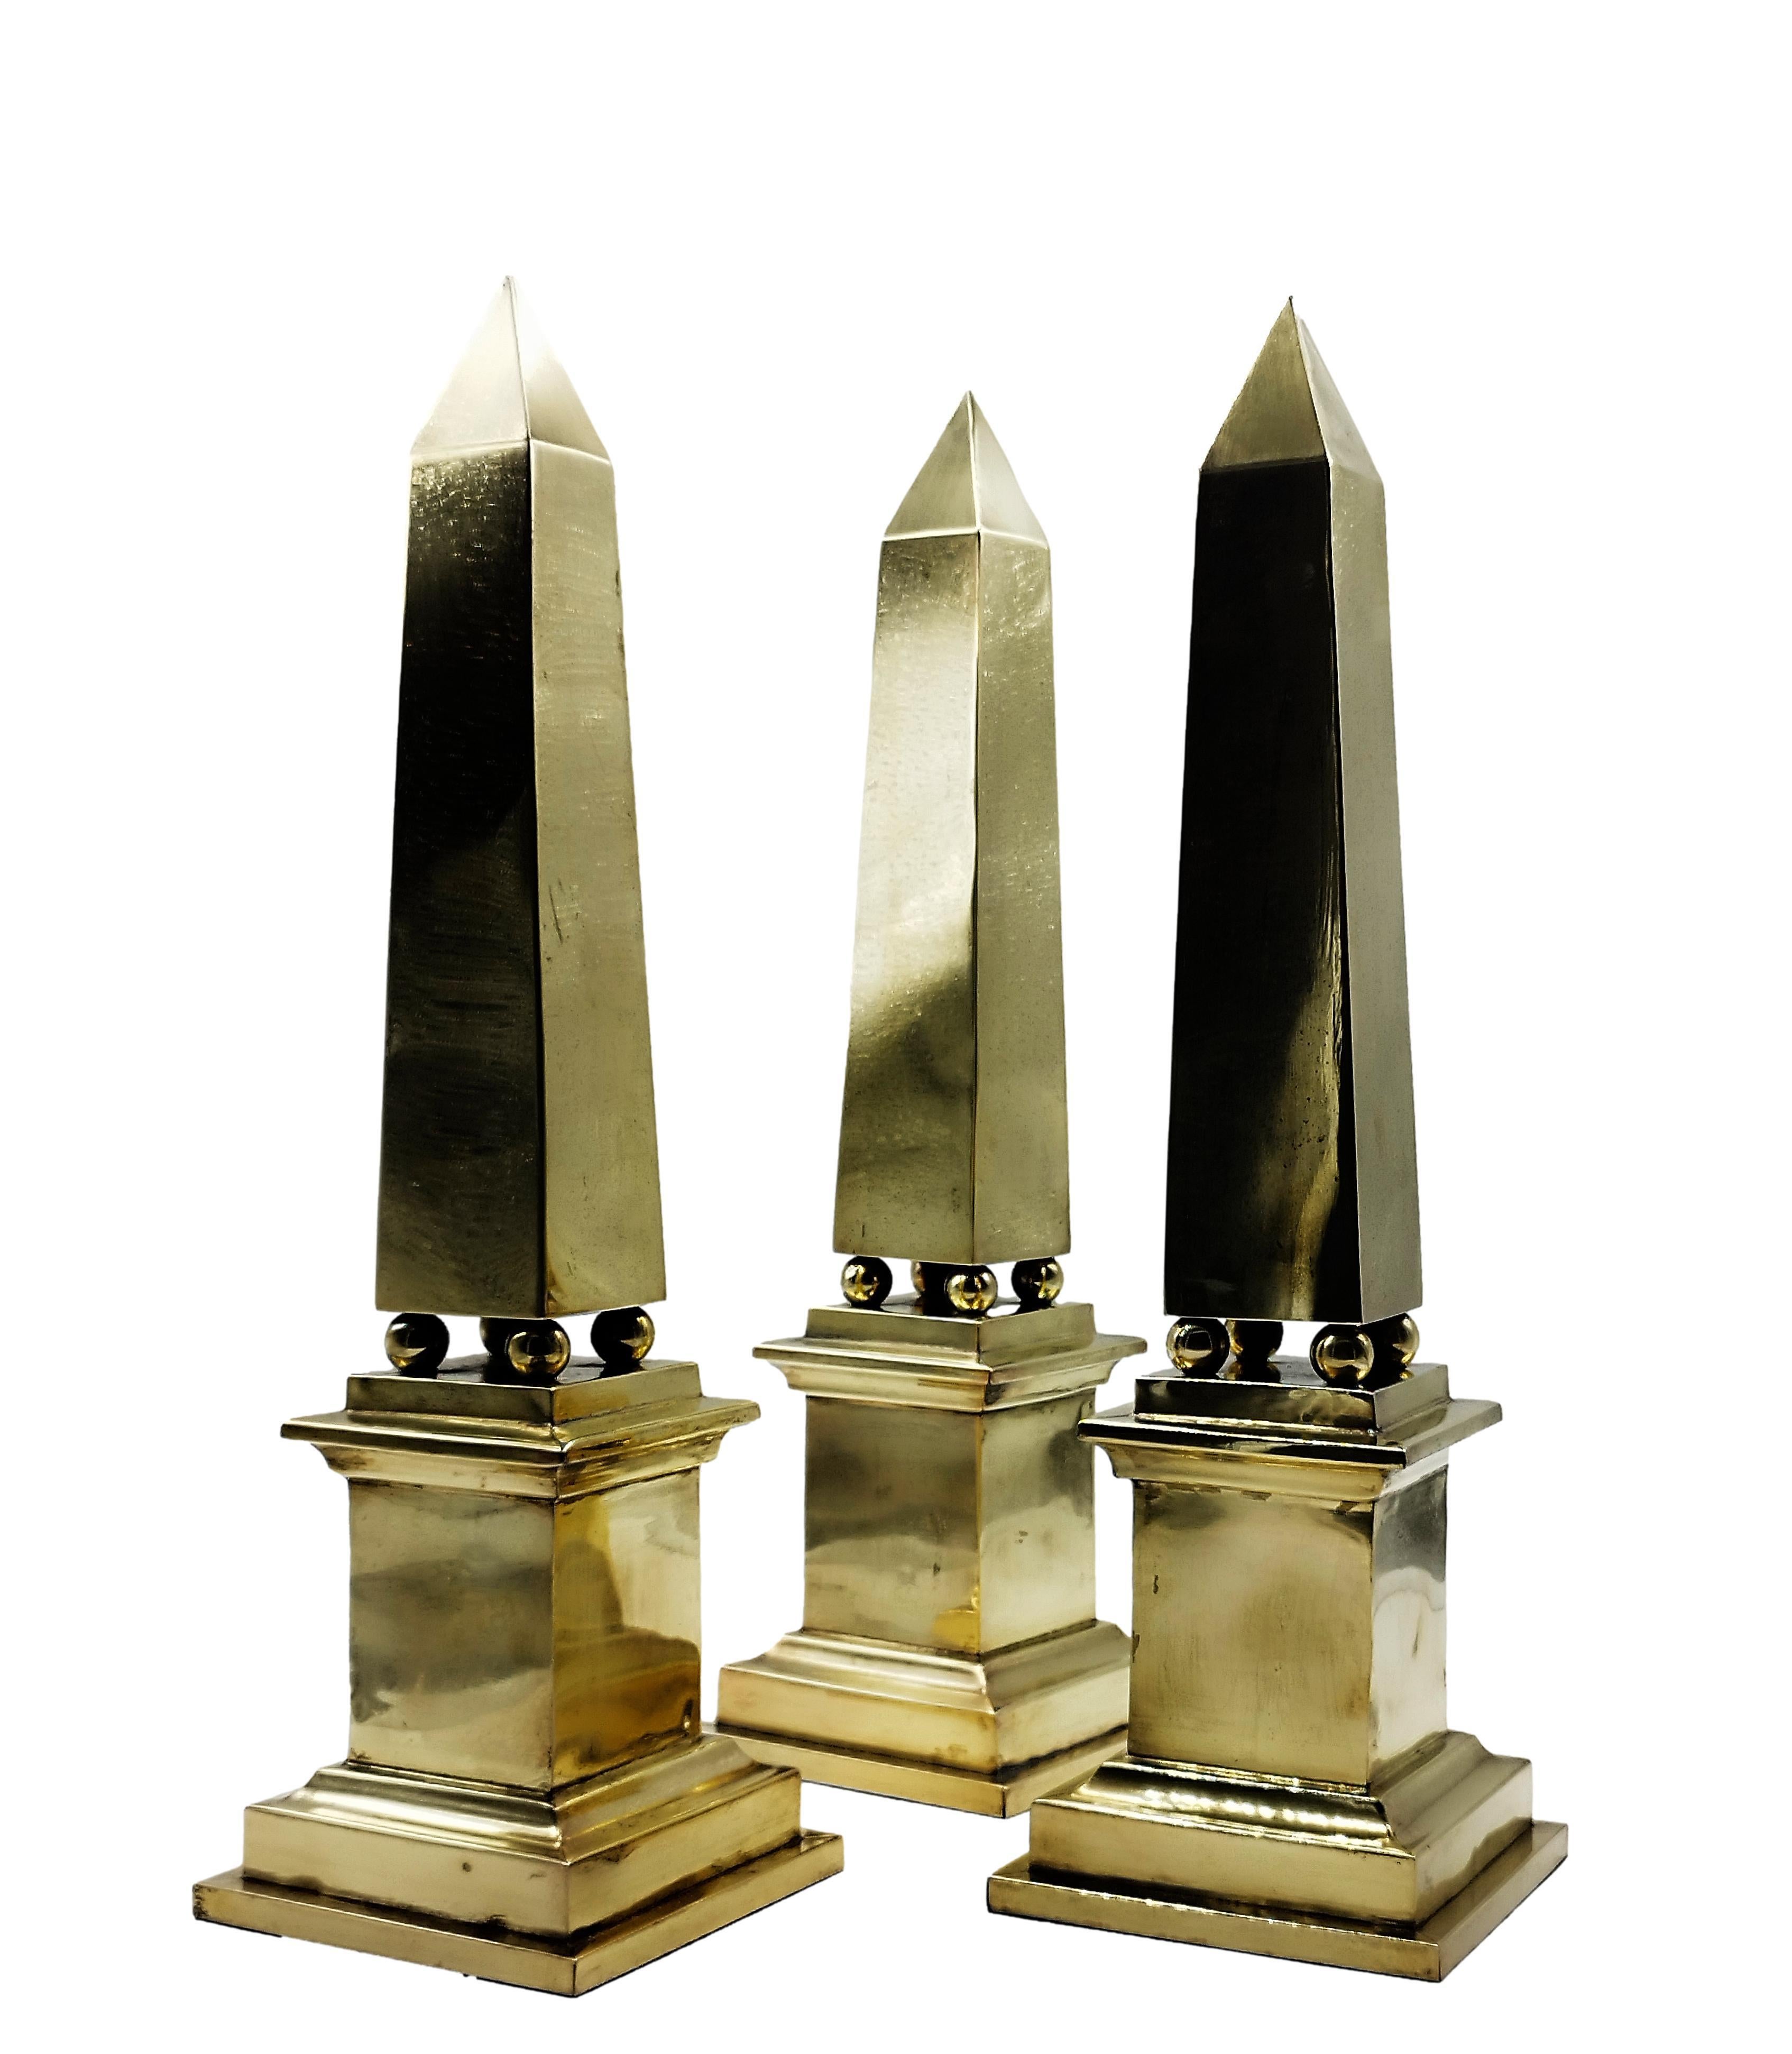 Brass obelisk with a square skyscraper-style base on which four spherical brass forms support the body. Obelisks are tapering rectangular volumetric shapes with faceted tops that come to a slender point. Harking back to classical Greek forms and